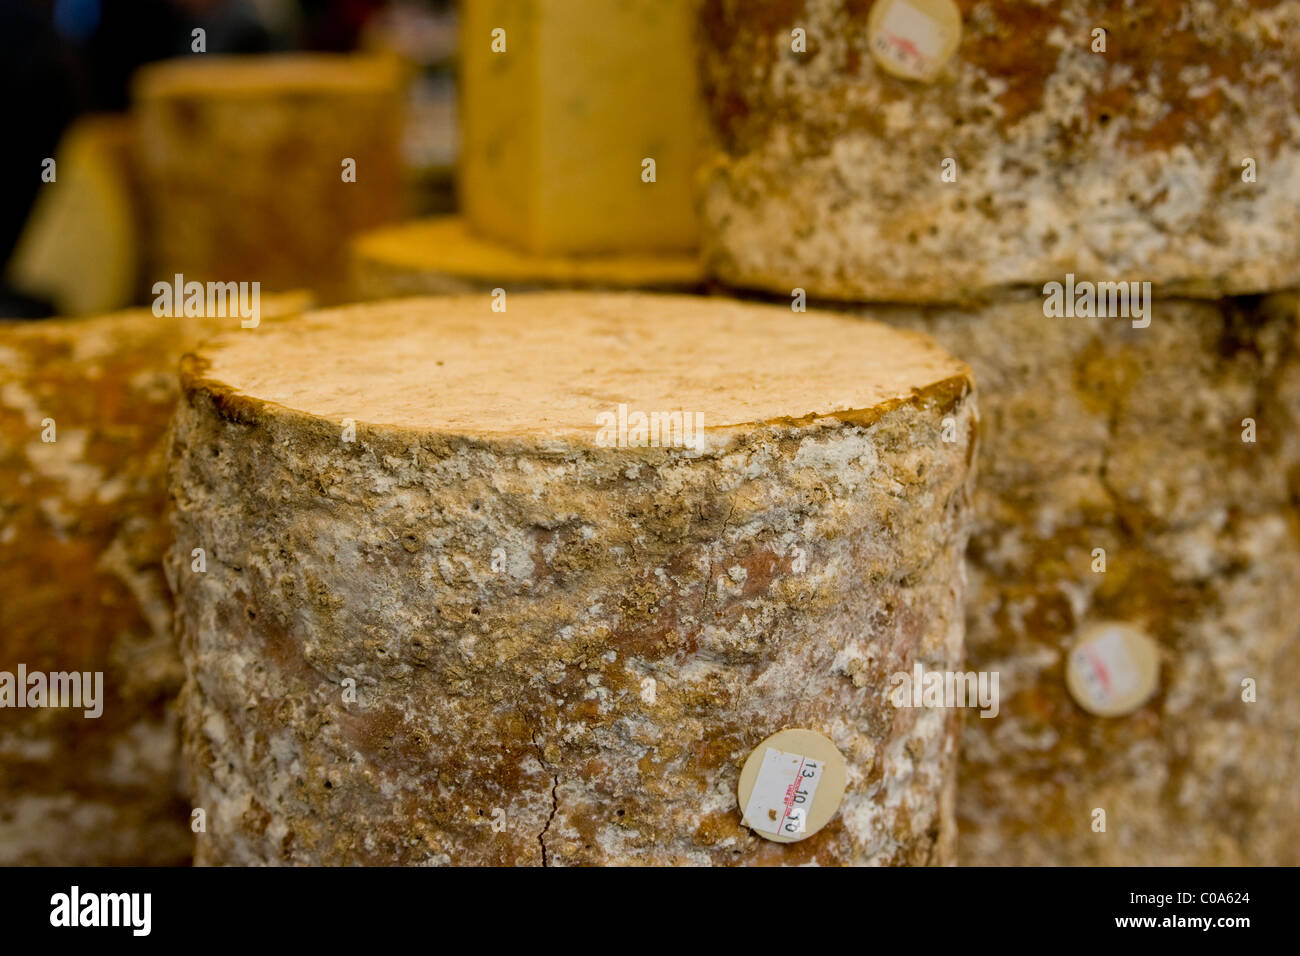 Cheese for sale Stock Photo